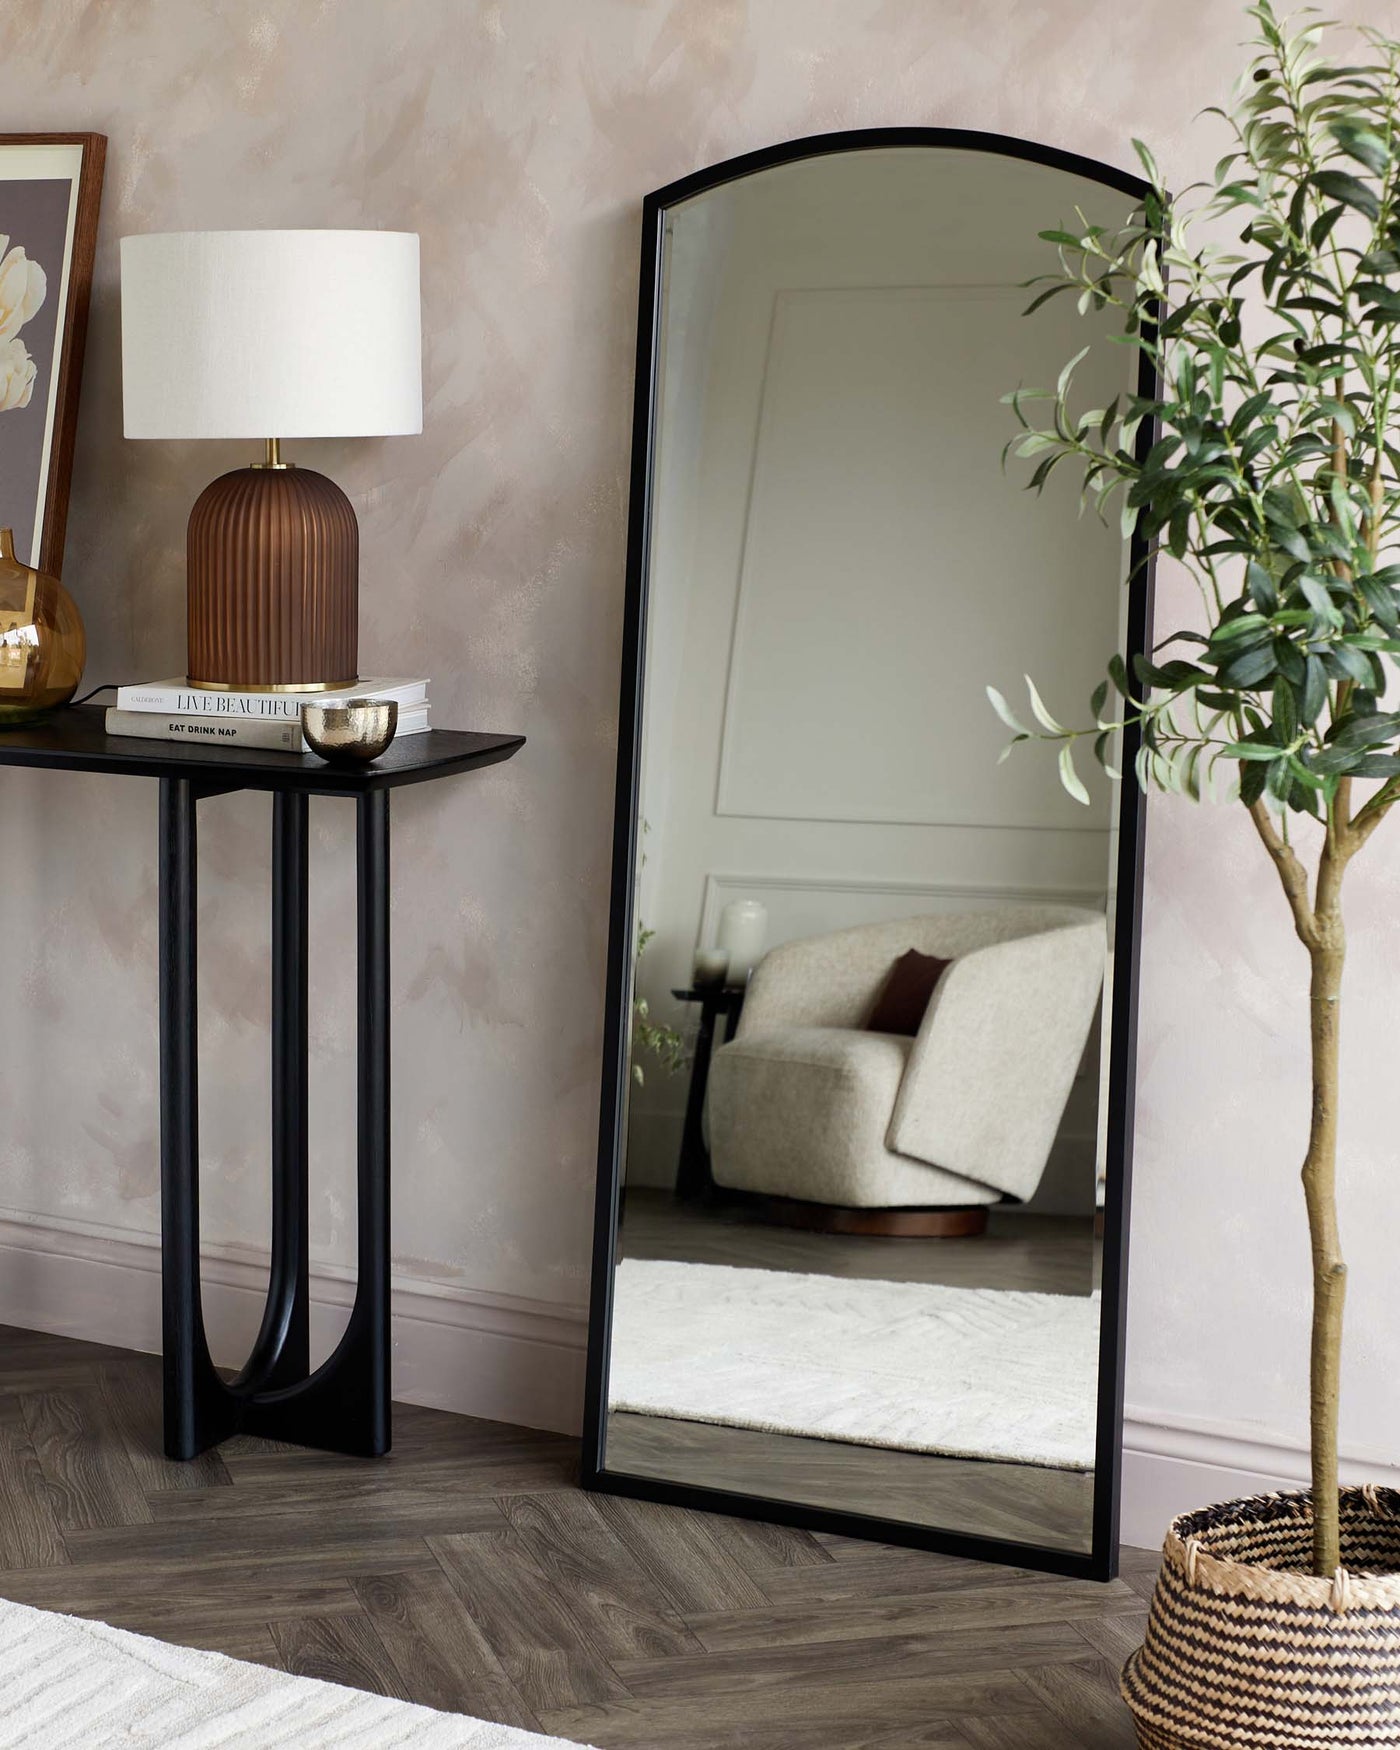 A sleek, modern black console table with a rectangular top and unique curved legs, paired with a large, arched floor mirror with a minimalist black frame. On the table rests a ribbed, cylindrical brown table lamp with a white shade, alongside a small stack of books and a decorative metallic bowl.